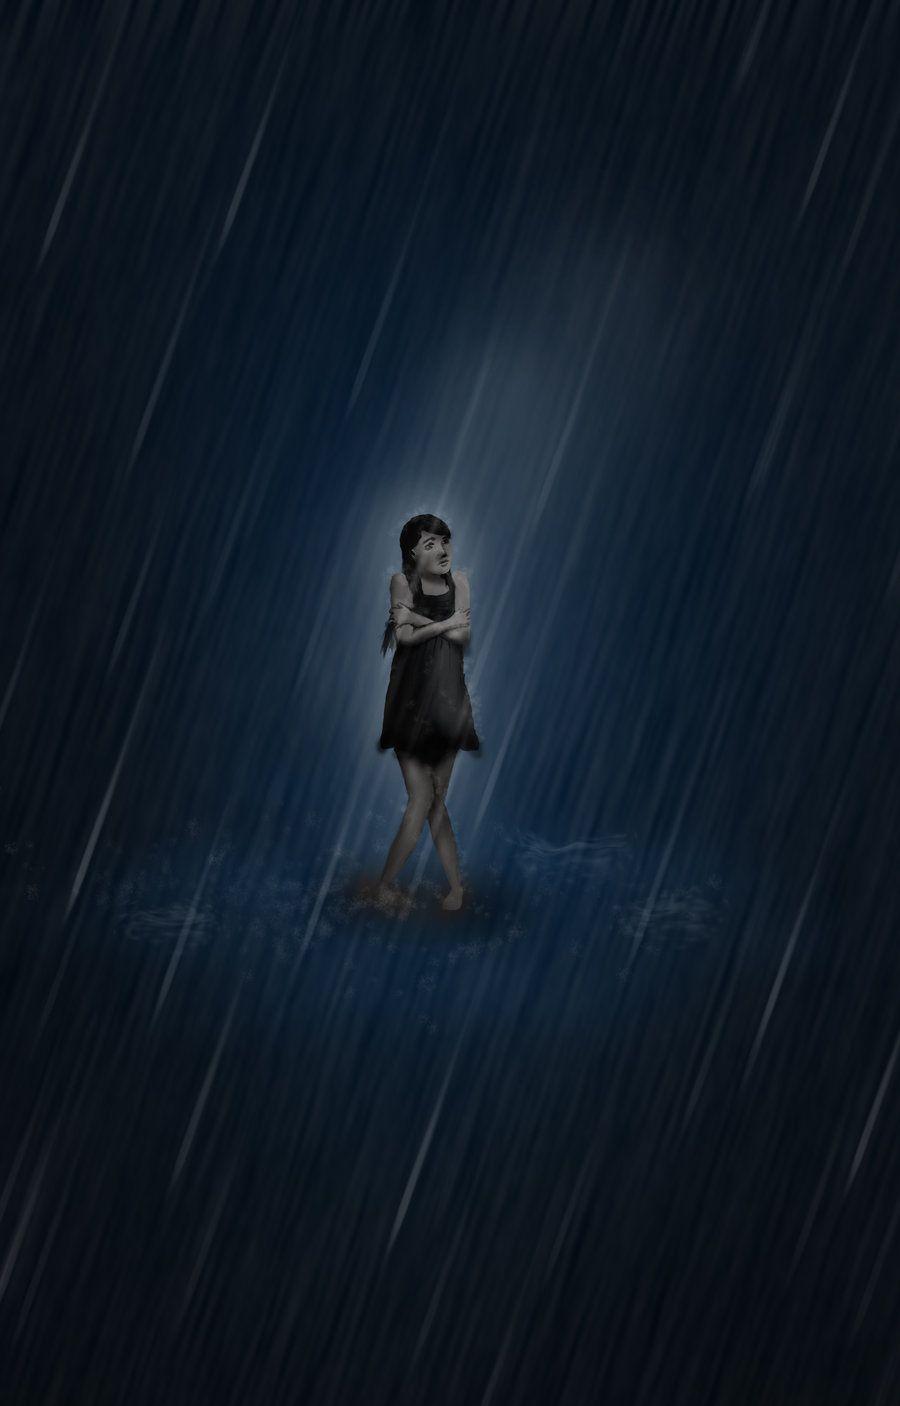 Alone in Rain Wallpapers - Top Free Alone in Rain Backgrounds ...